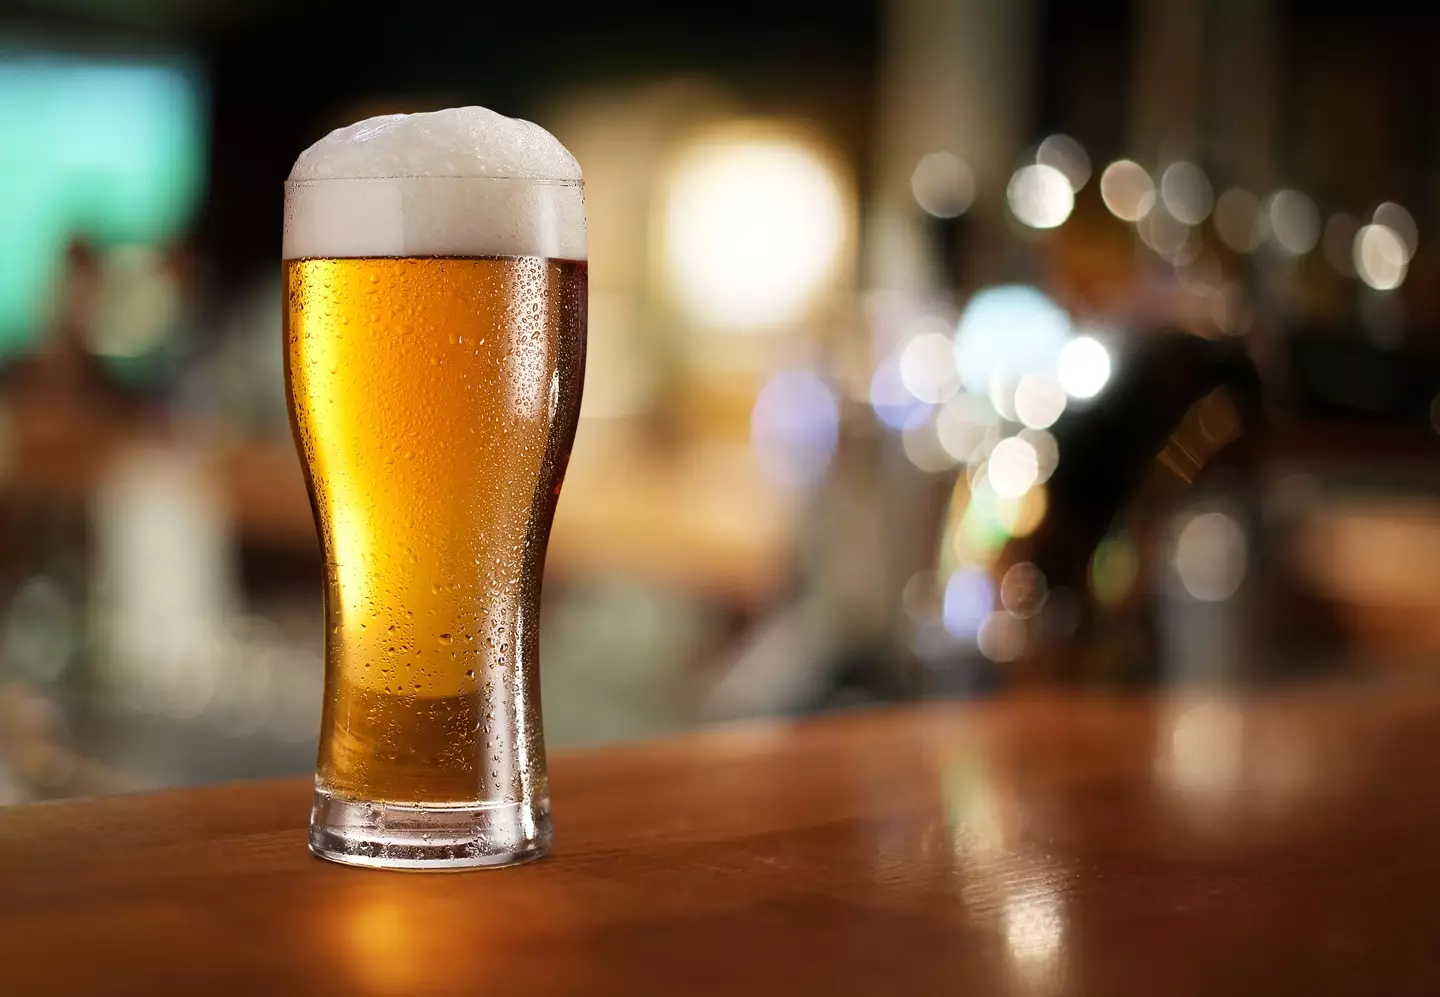 Bad news, boozehounds, new research reckons a pint in London will set you back £13.98 by 2025.